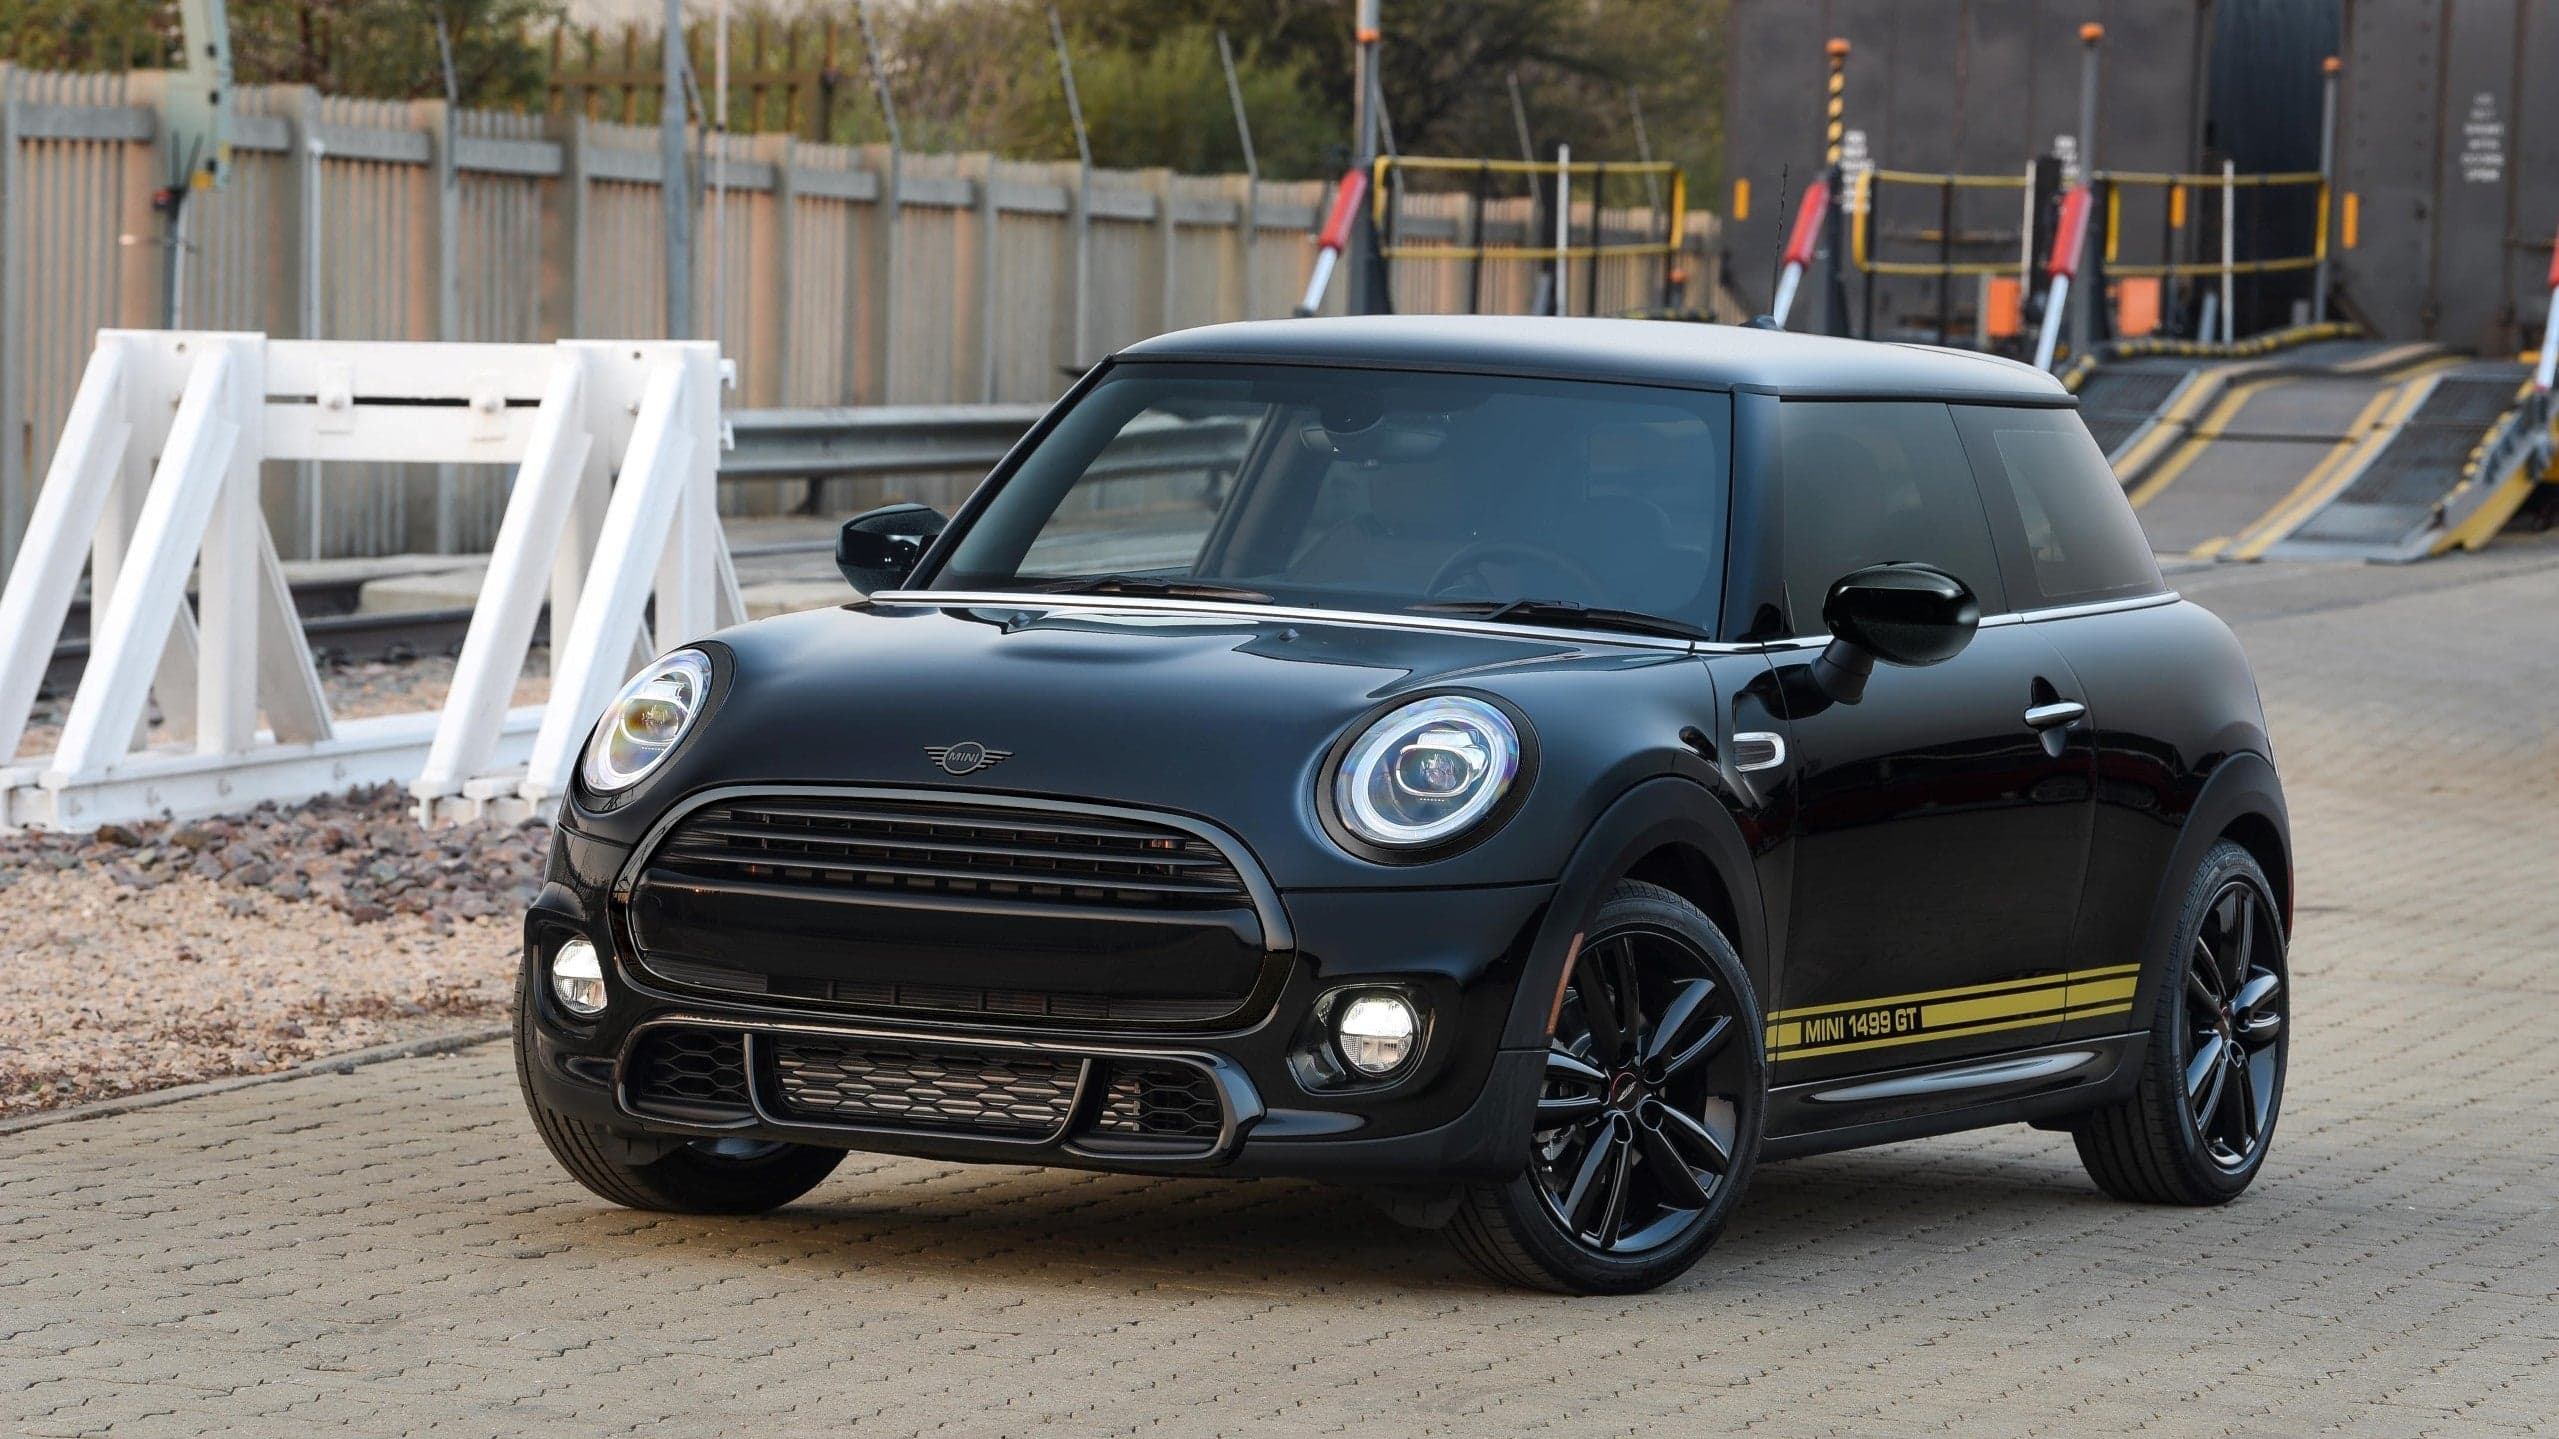 2021 Mini Cooper Hardtop, Countryman Go Retro With 1499 GT and Oxford Special Editions